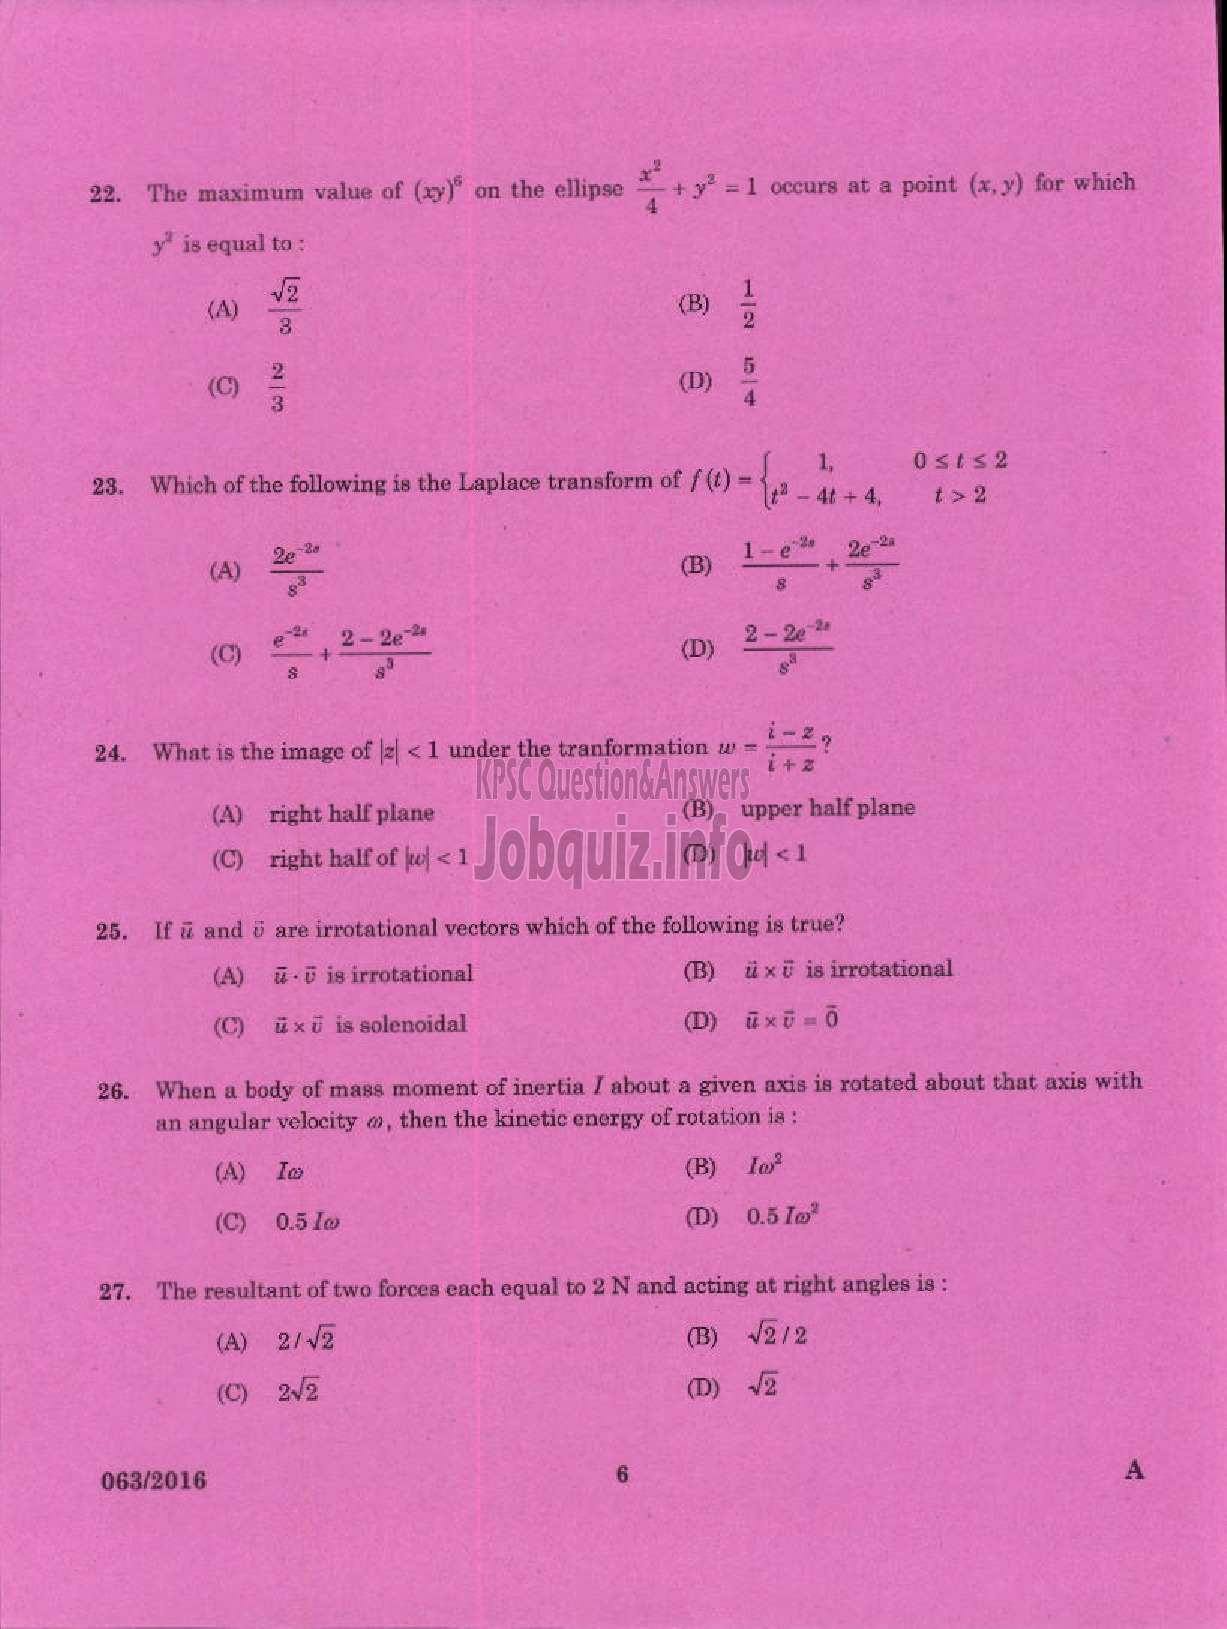 Kerala PSC Question Paper - ASSISTANT PROFESSOR IN ELECTRICAL AND ELECTRONICS ENGINEERING TECHNICAL EDUCATION ENGINEERING COLLEGES-4